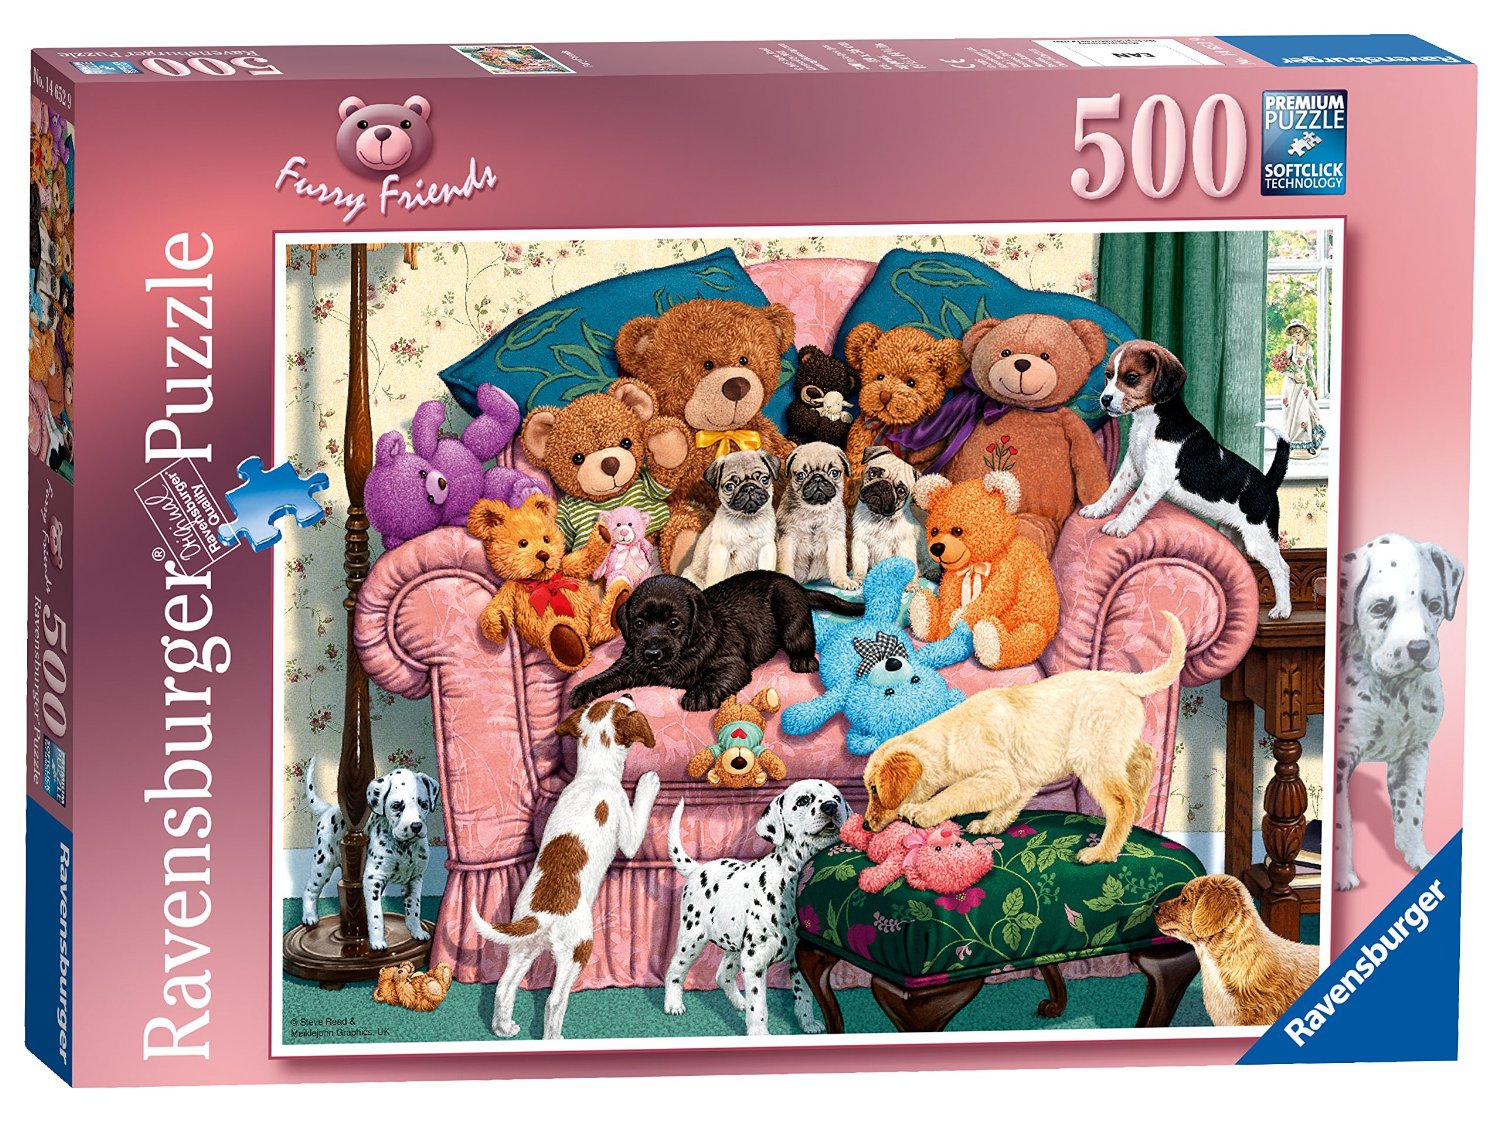 Ravensburger 'Furry Friends' 500 Piece Jigsaw Puzzle Game